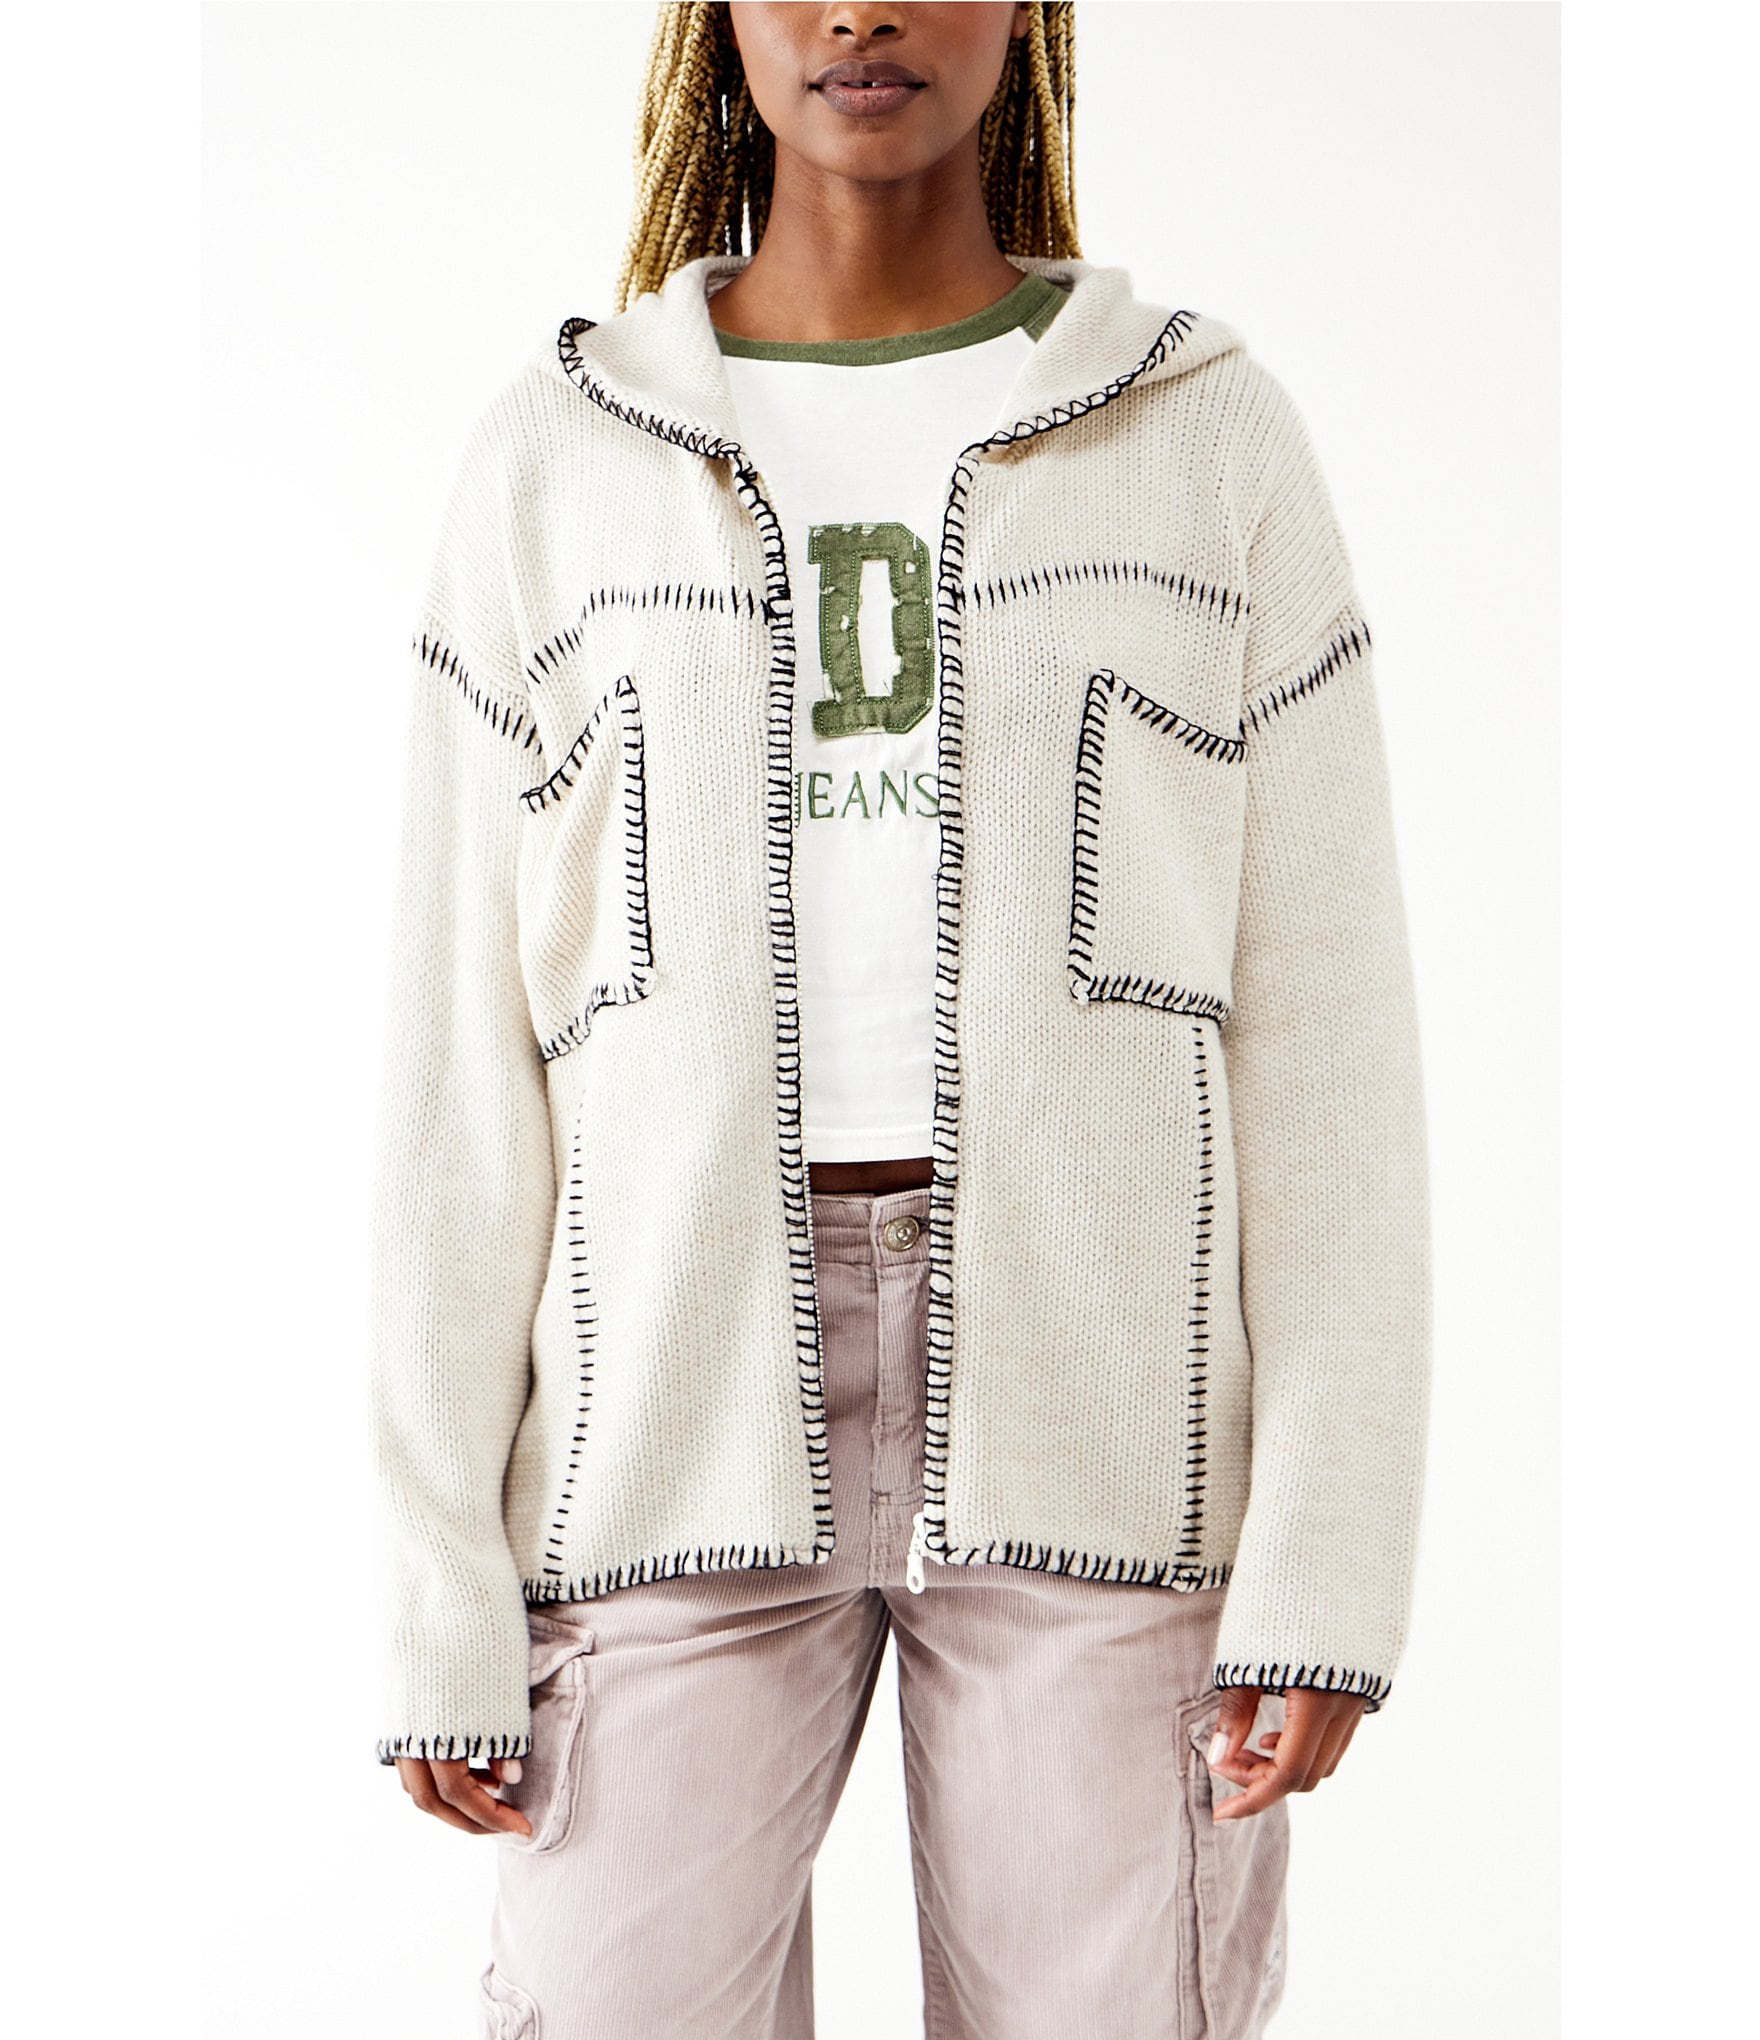 BDG Urban Outfitters Blanket Stitch Zip Up Hooded Jacket